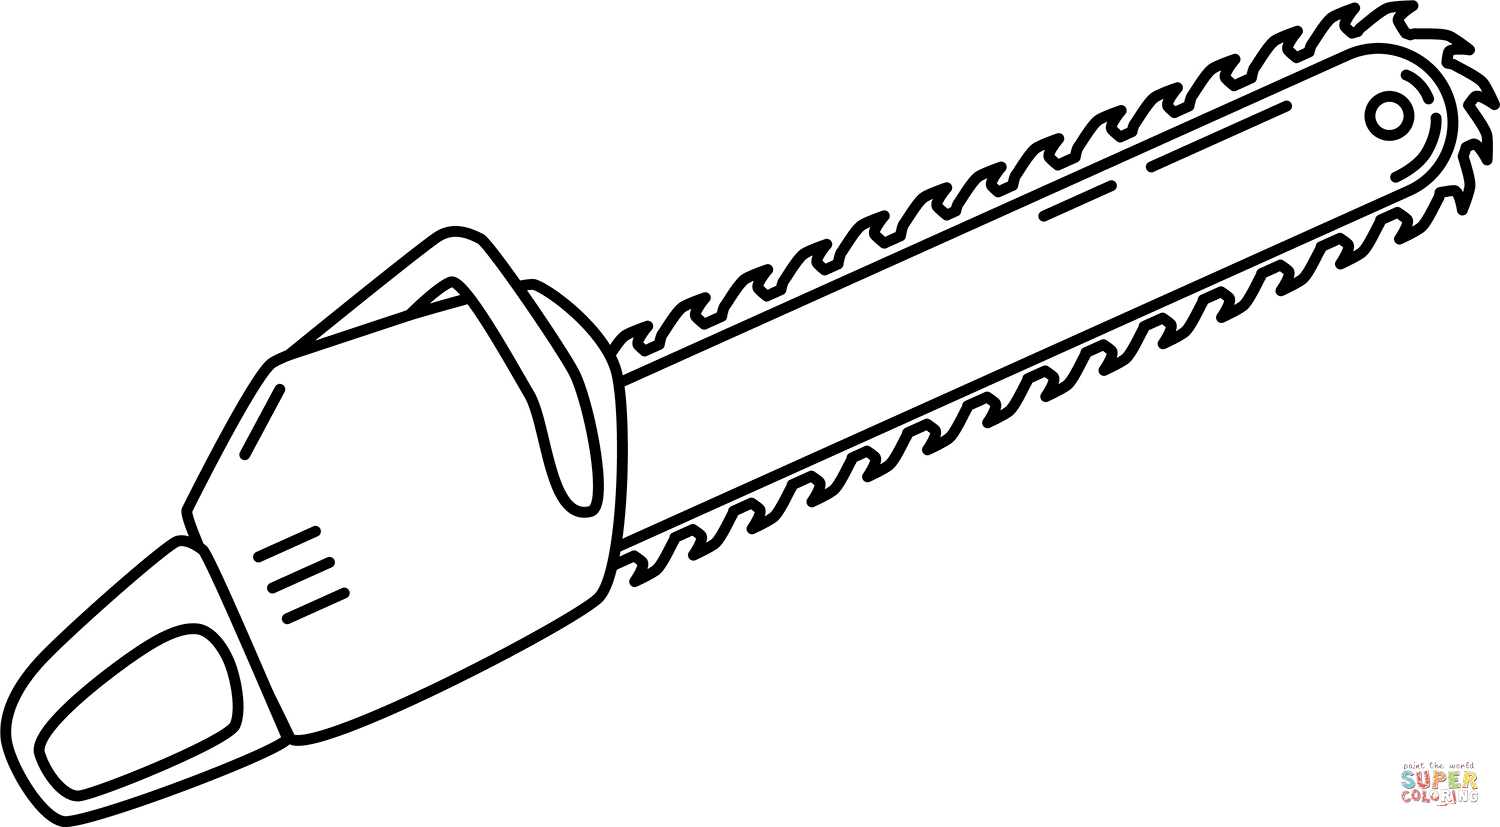 Chainsaw coloring page free printable coloring pages